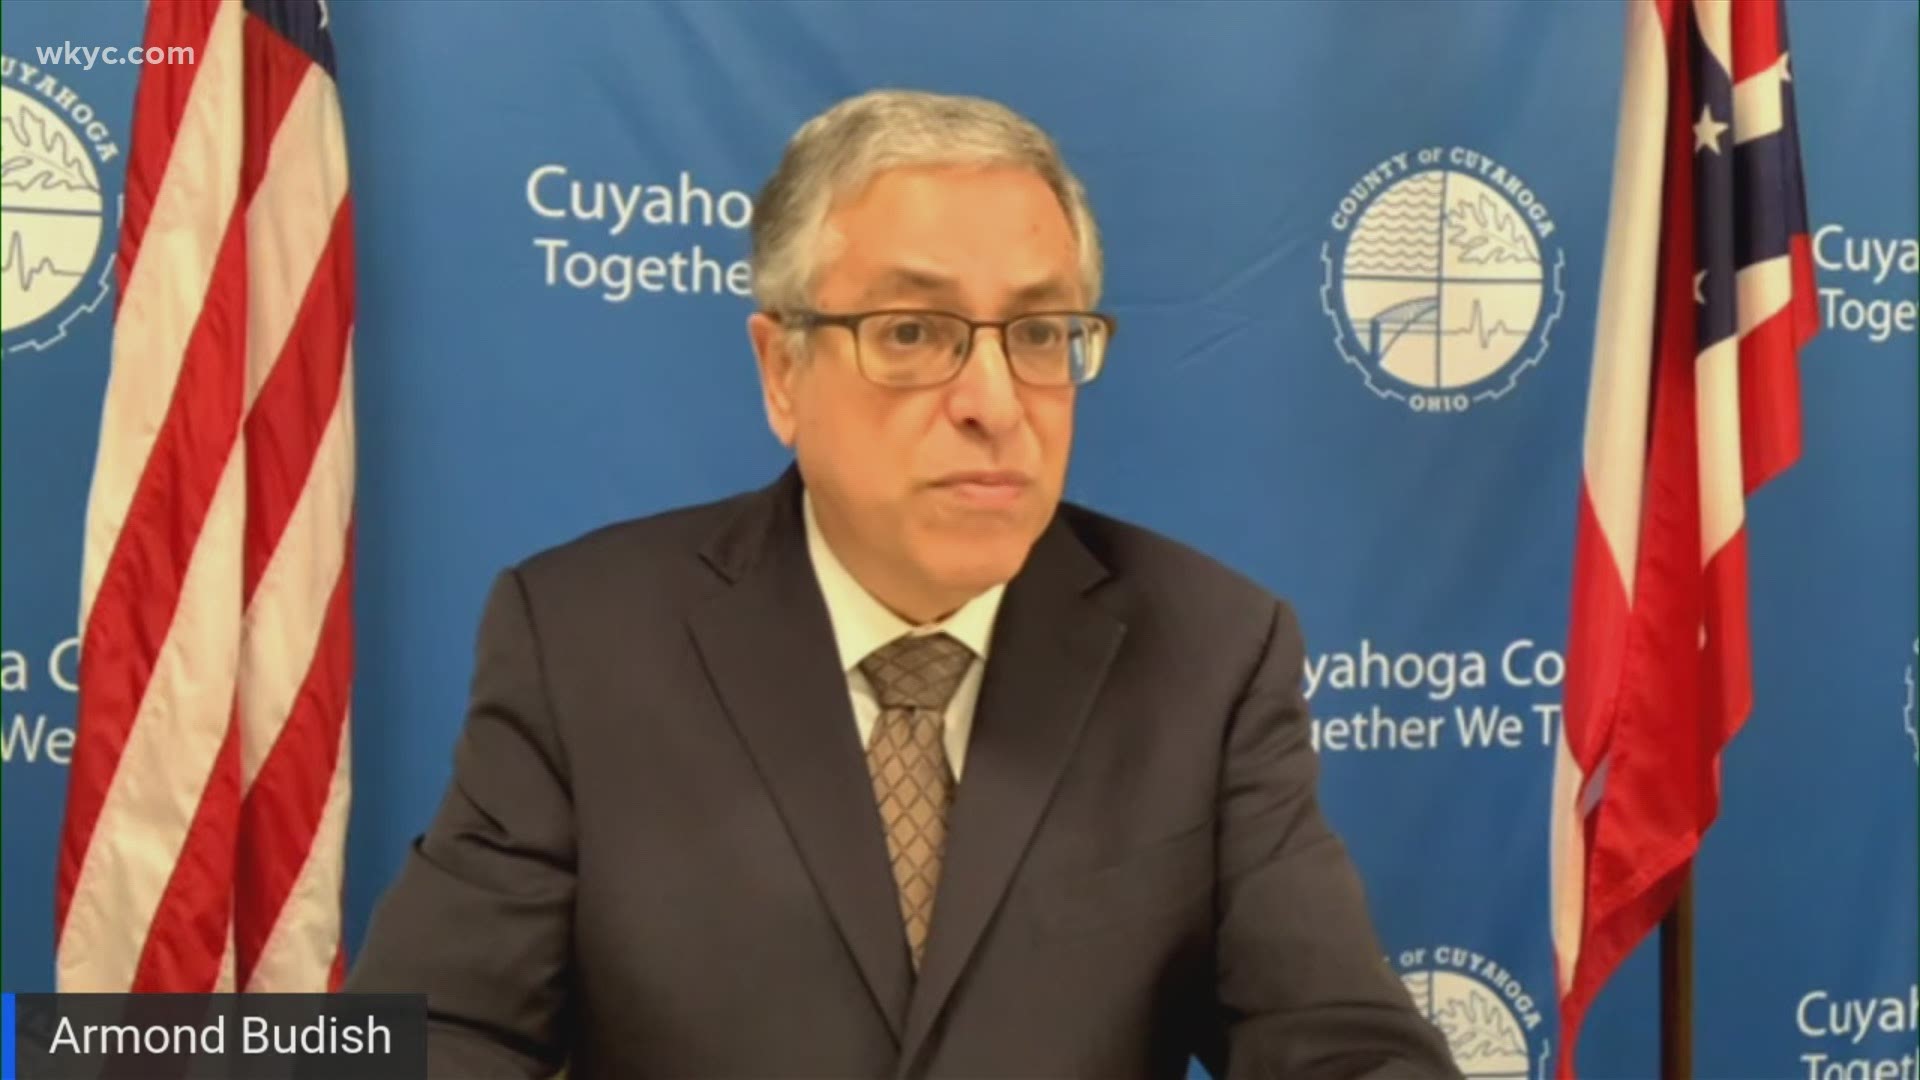 Budish addressed the move by the General Assembly during a COVID-19 briefing on Friday. Cuyahoga County Health Commissioner Terry Allan also spoke.